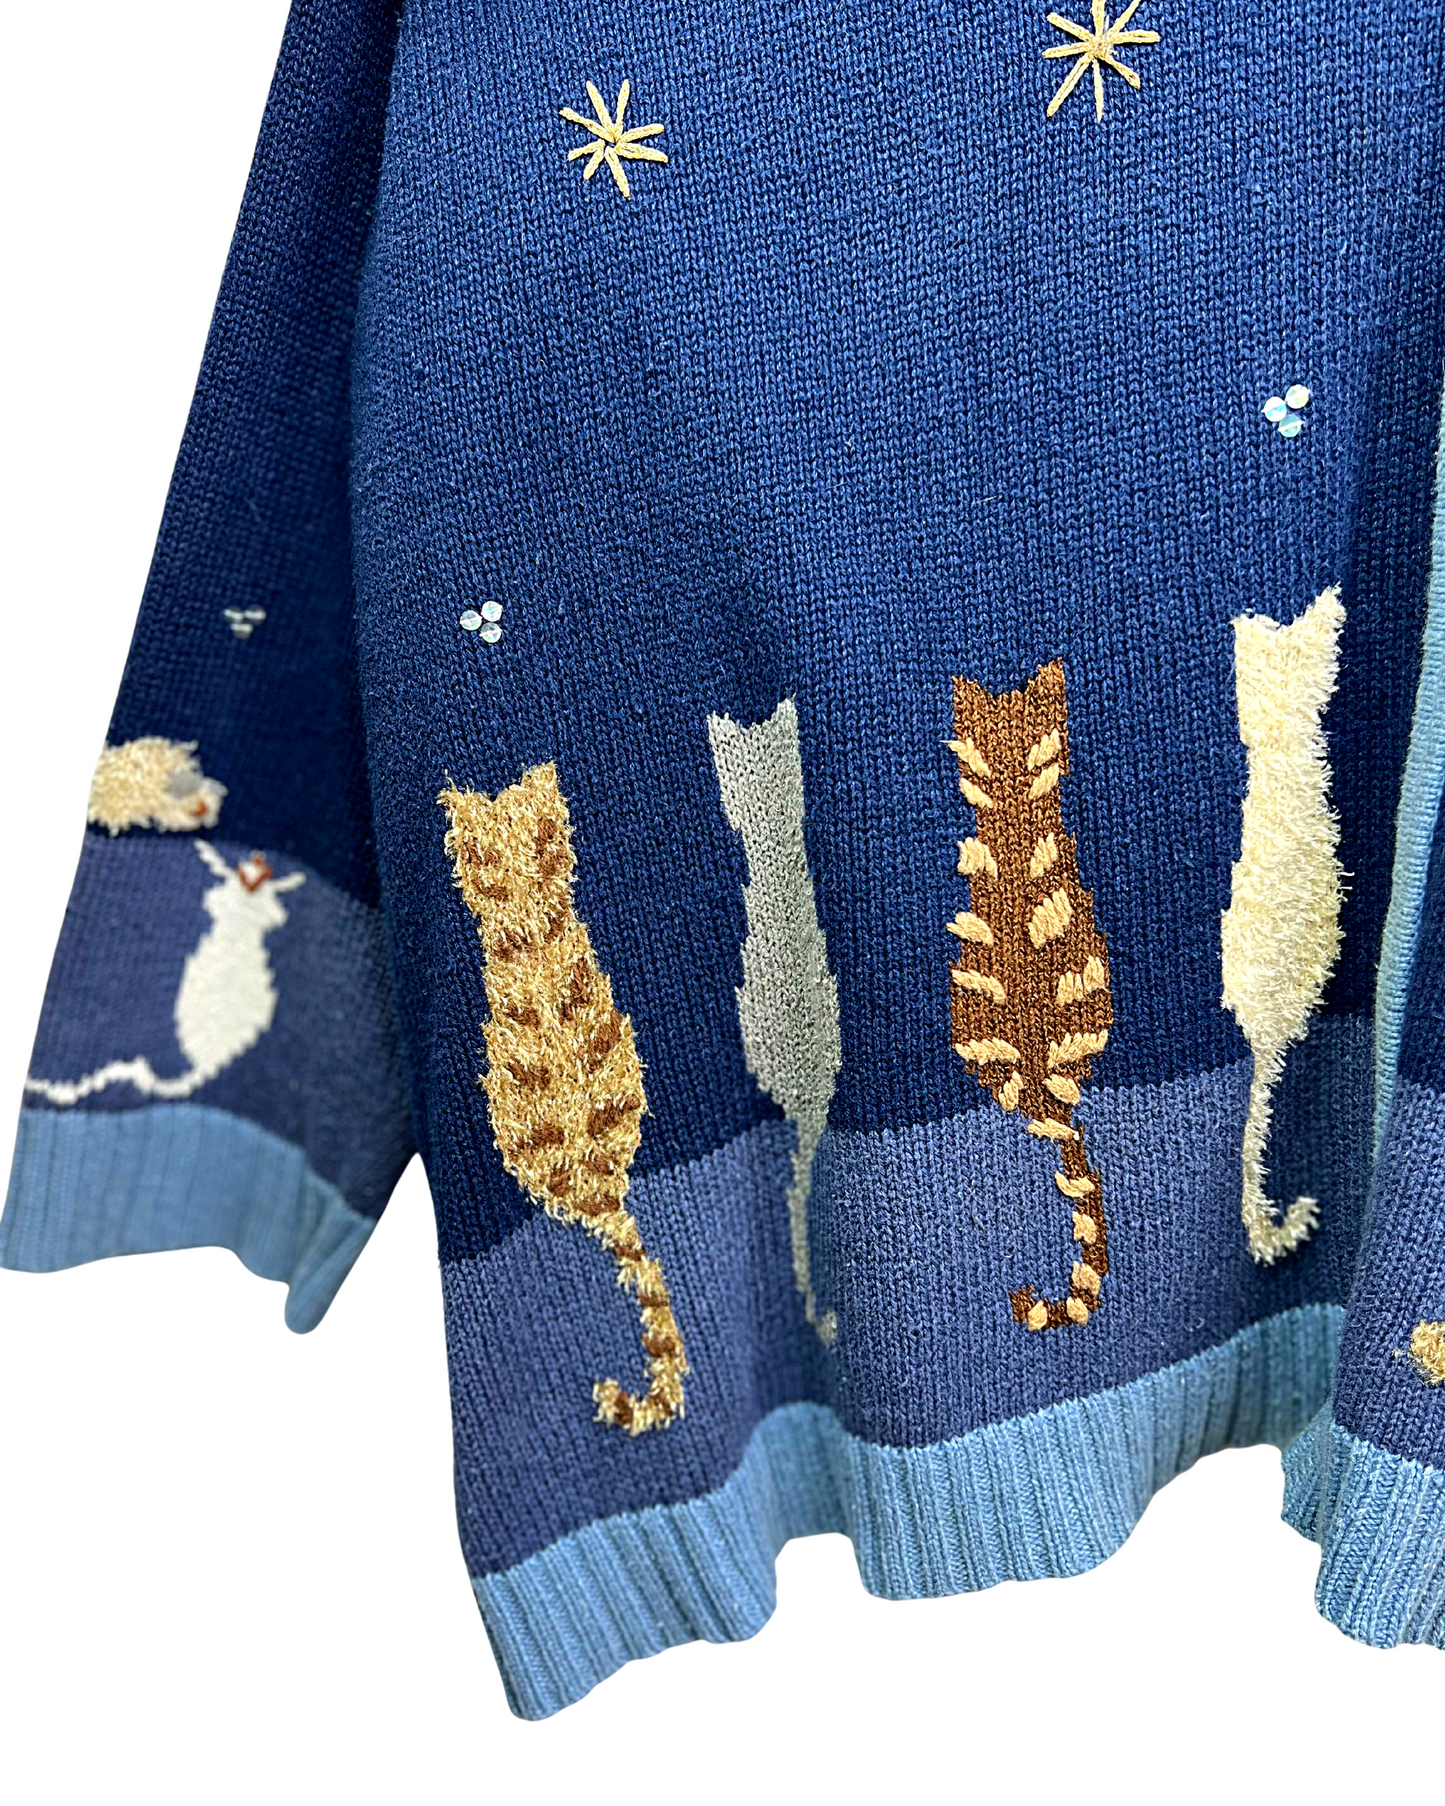 90’s Cats on Fence Chunky Cardigan Plus Size 3X